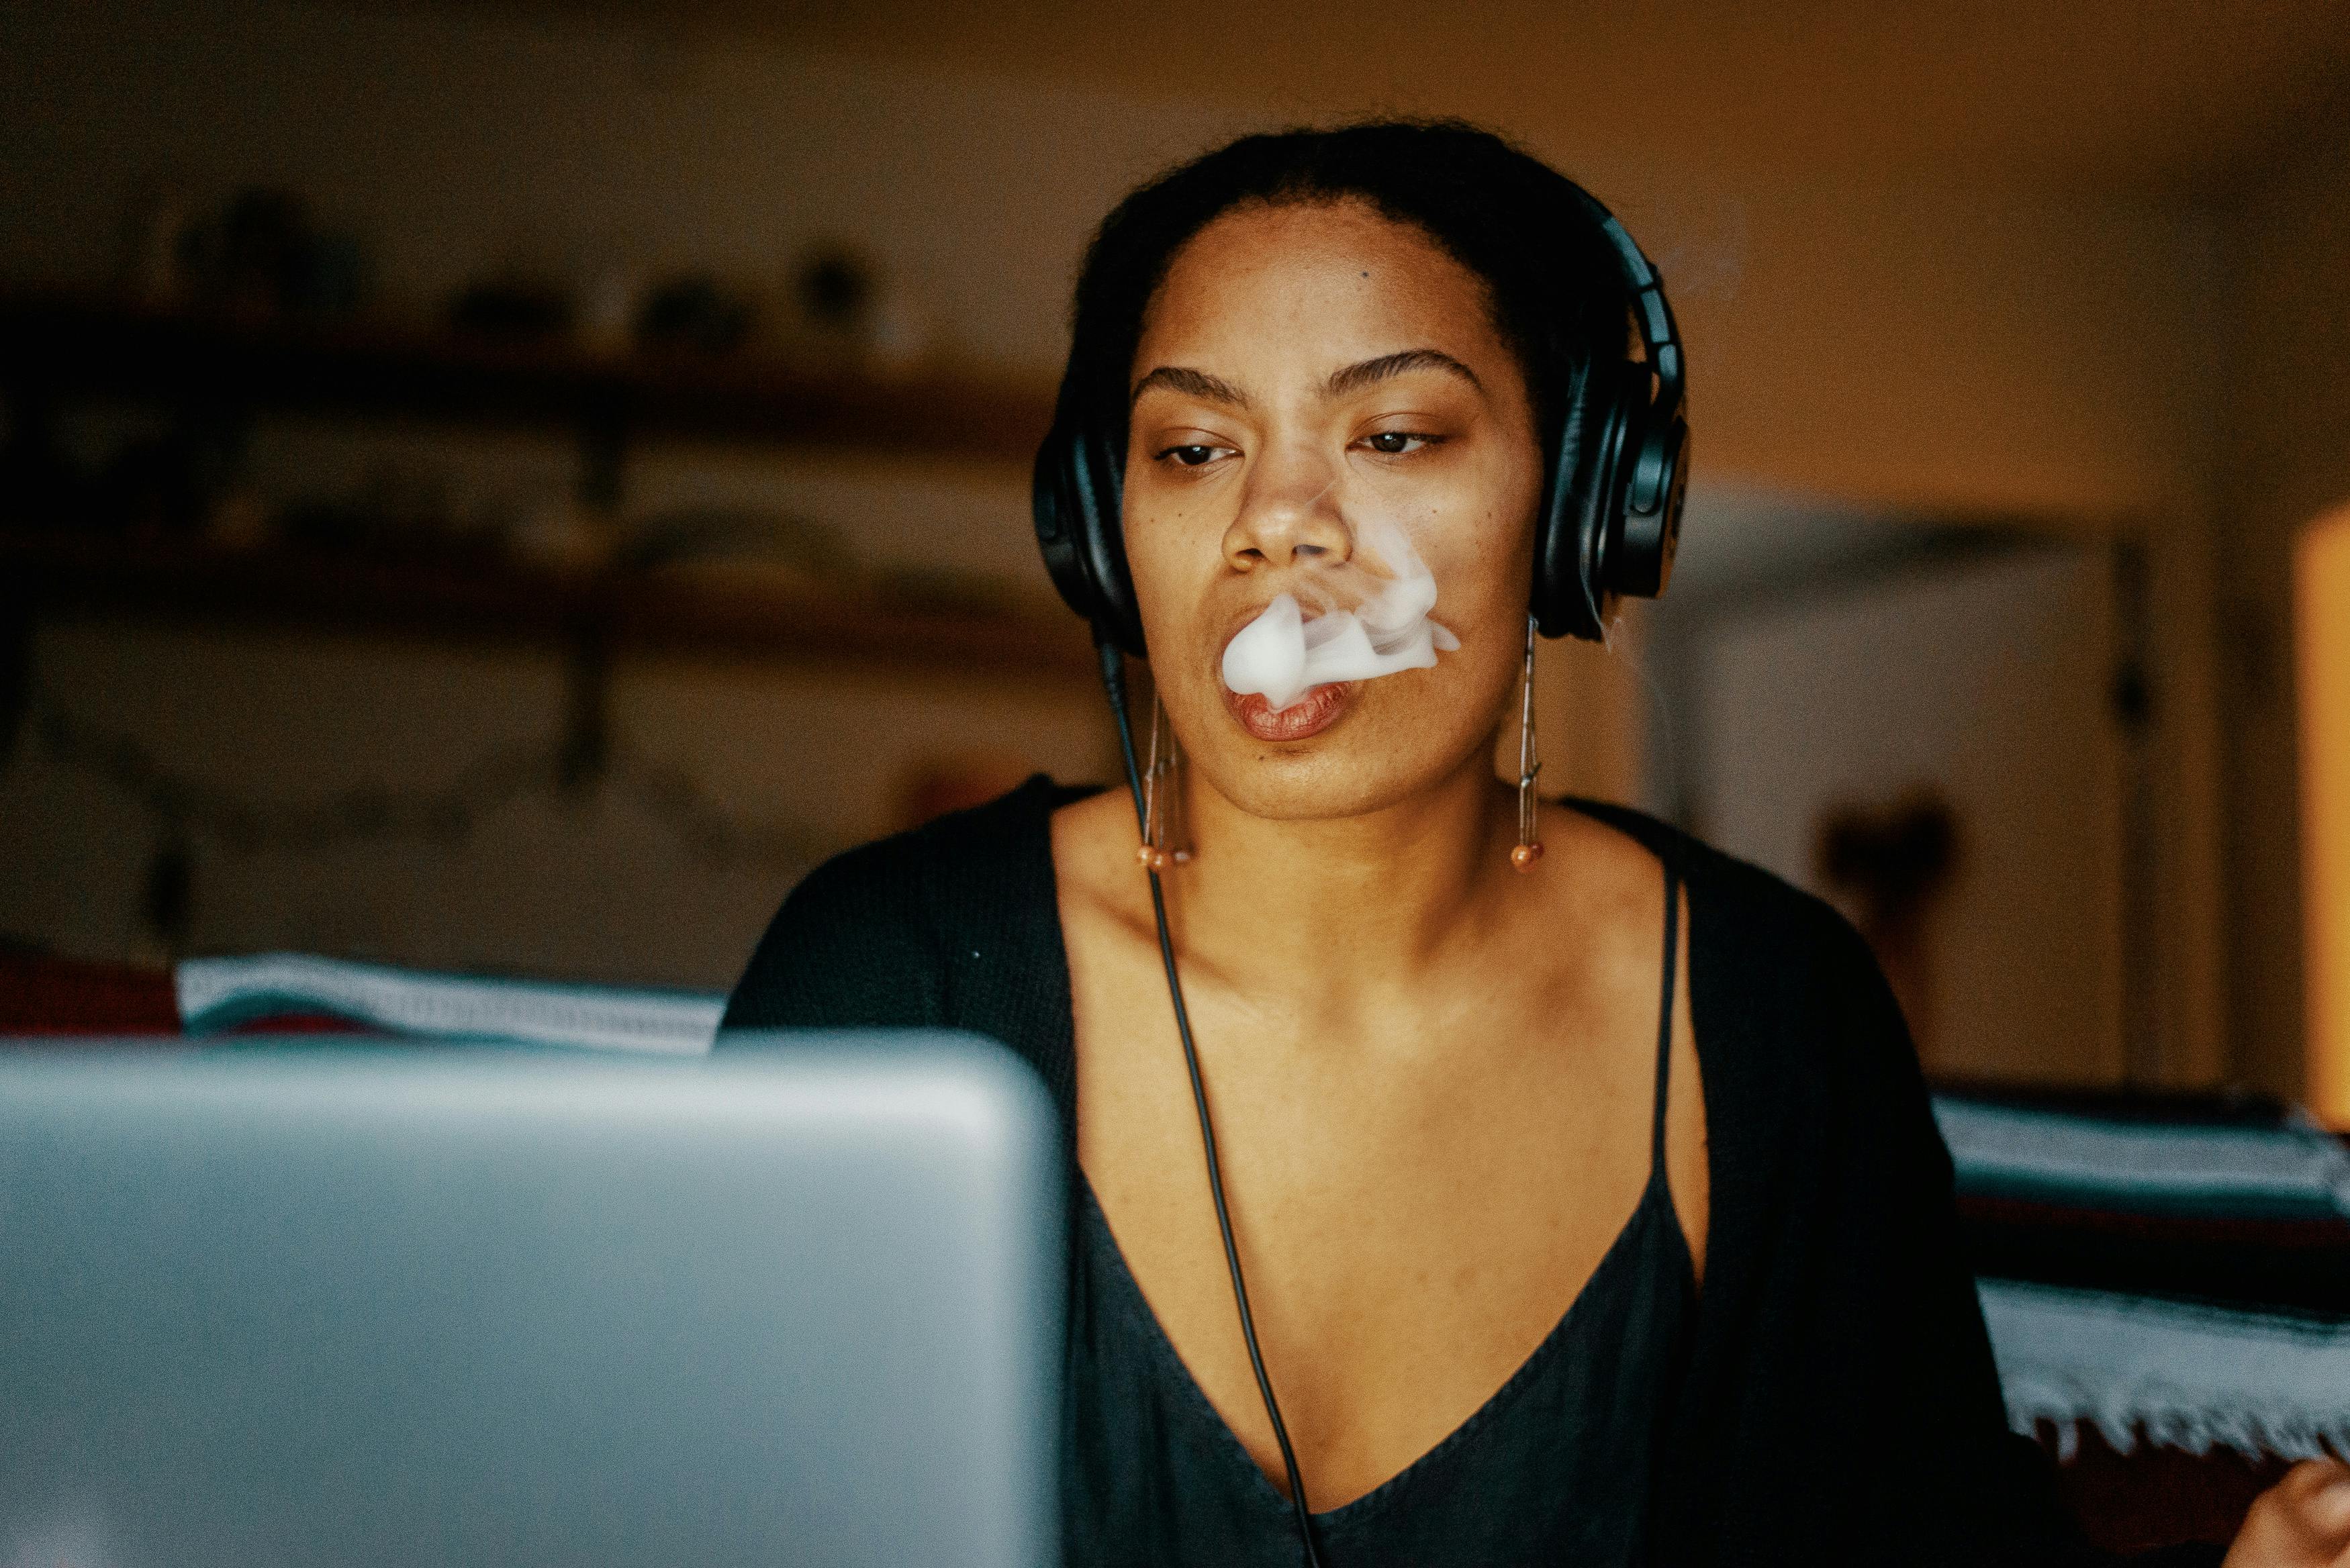 A woman watches the best weed youtube channels on her laptop